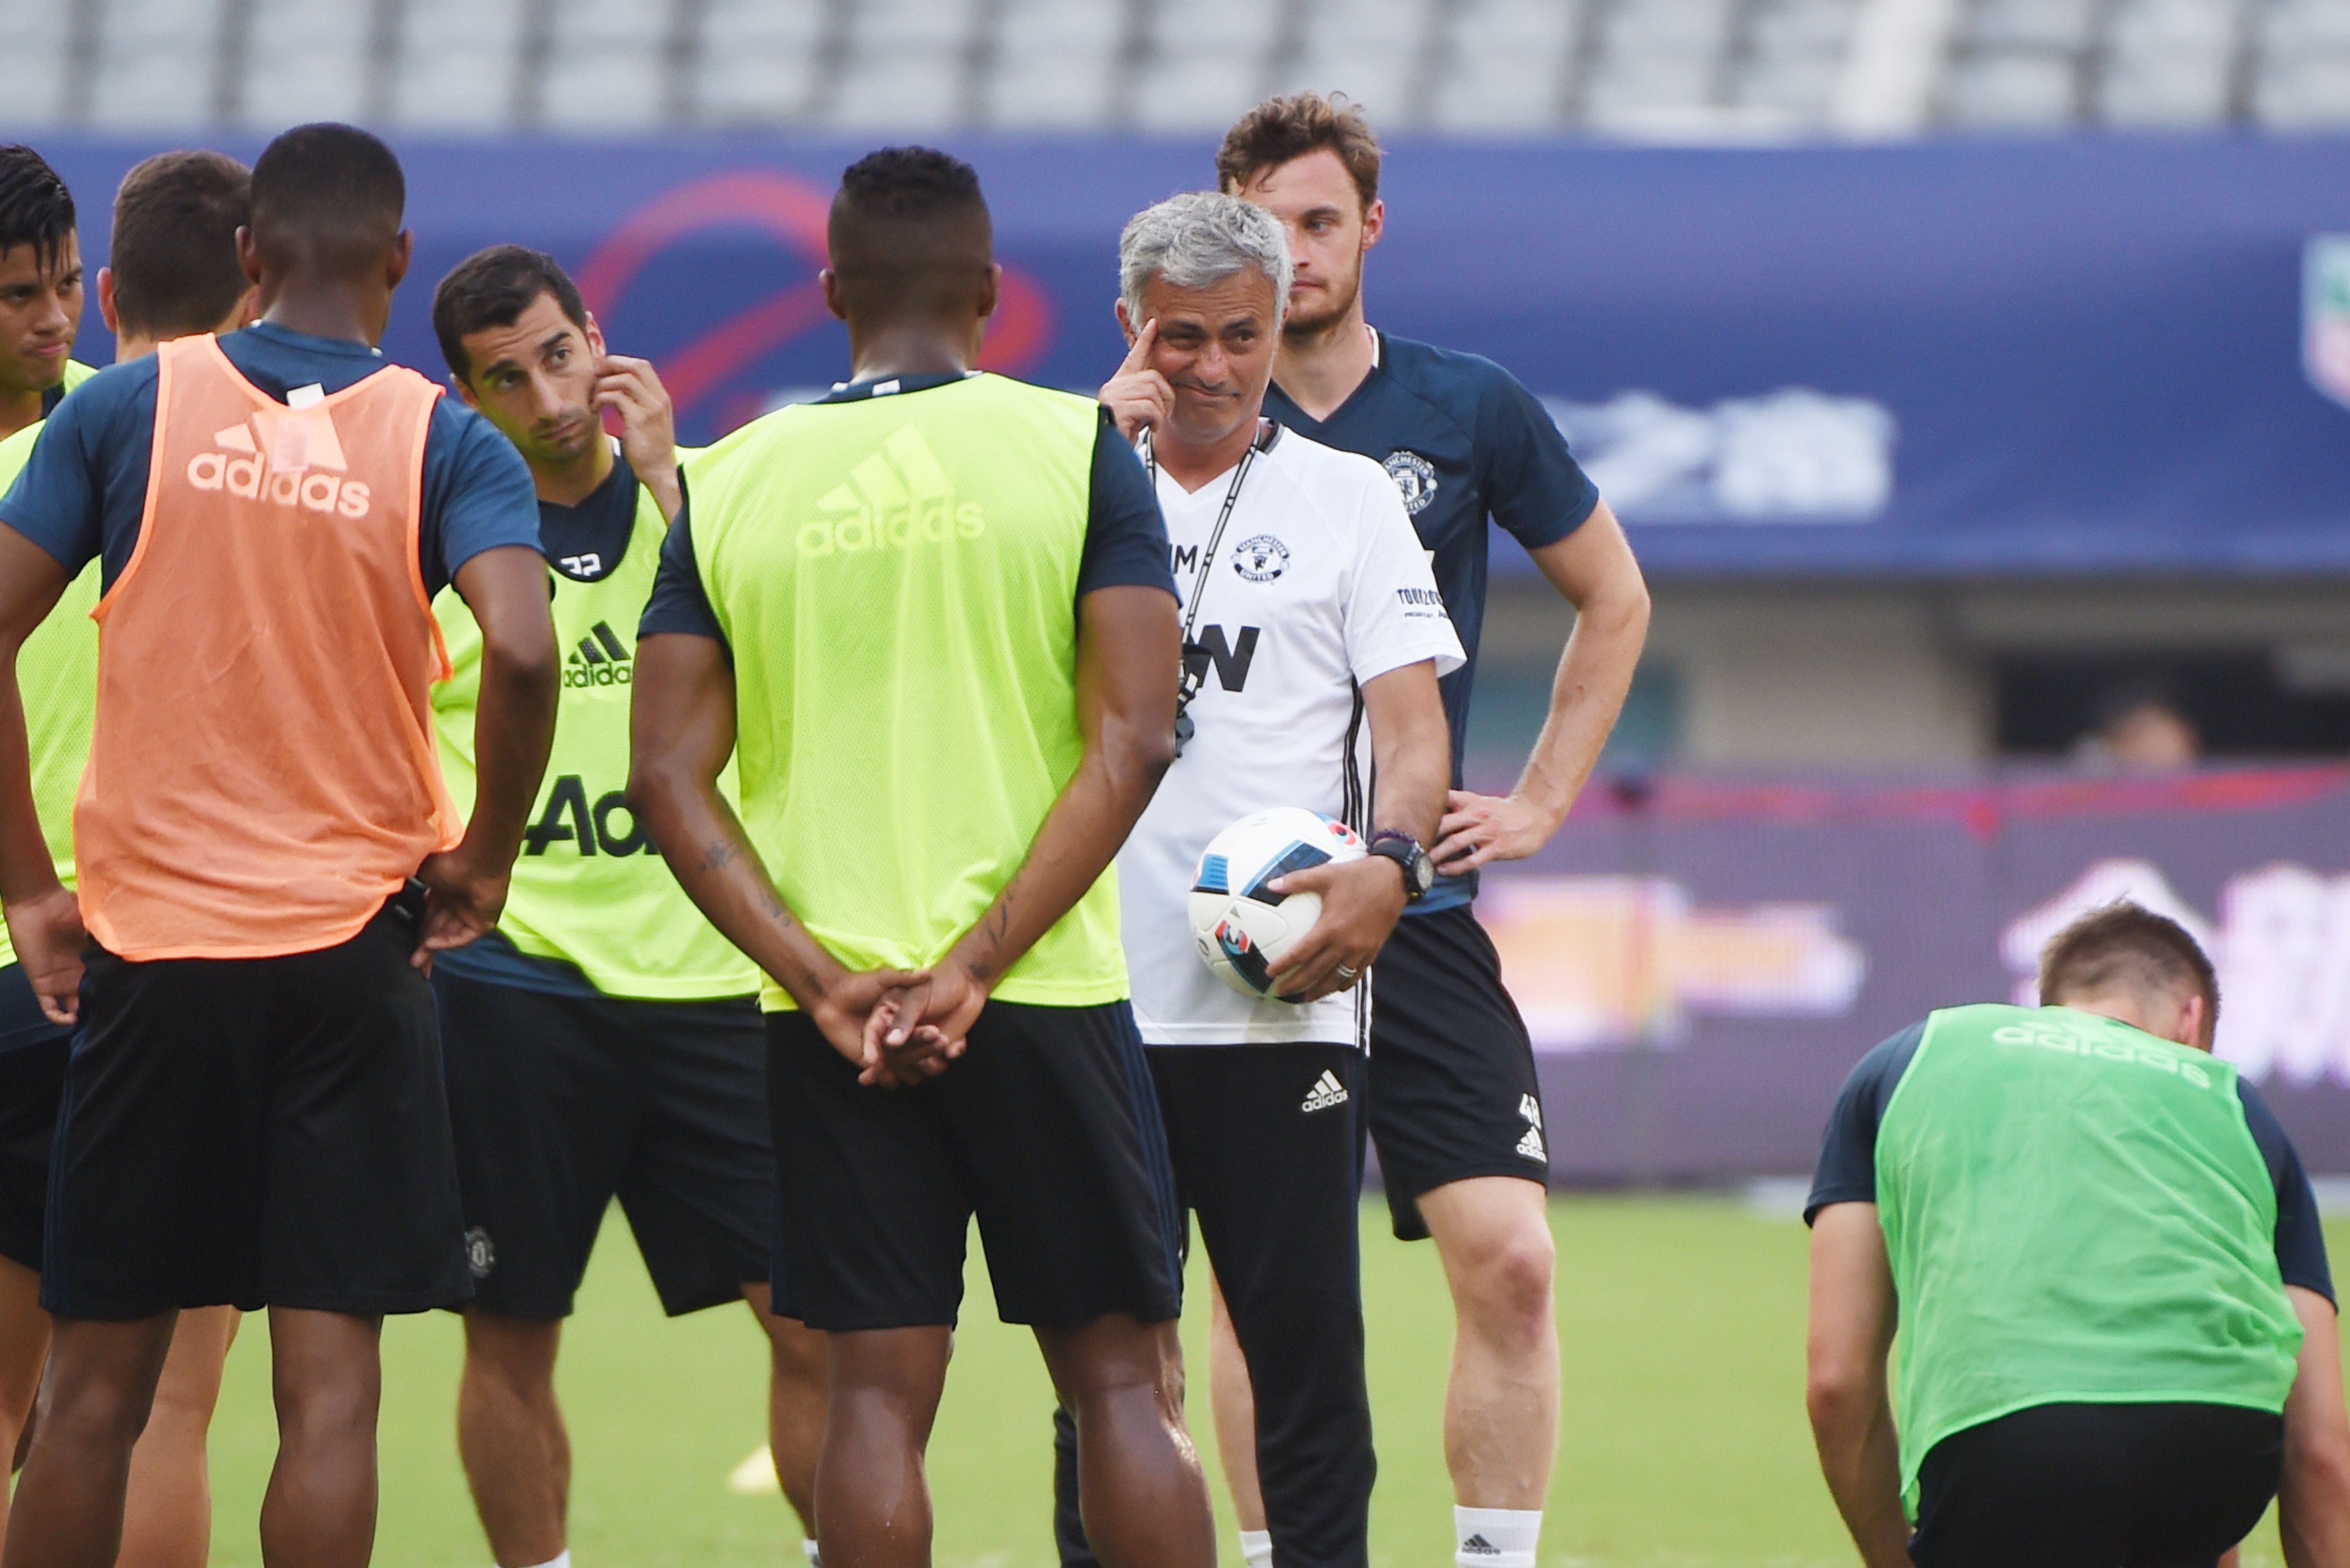 Manchester United's head coach Jose Mourinho (C) reacts as he takes part in a training session with teammates ahead of the 2016 International Champions Cup football match between Manchester United and Dortmund in Shanghai on July 21, 2016. / AFP / WANG ZHAO        (Photo credit should read WANG ZHAO/AFP/Getty Images)